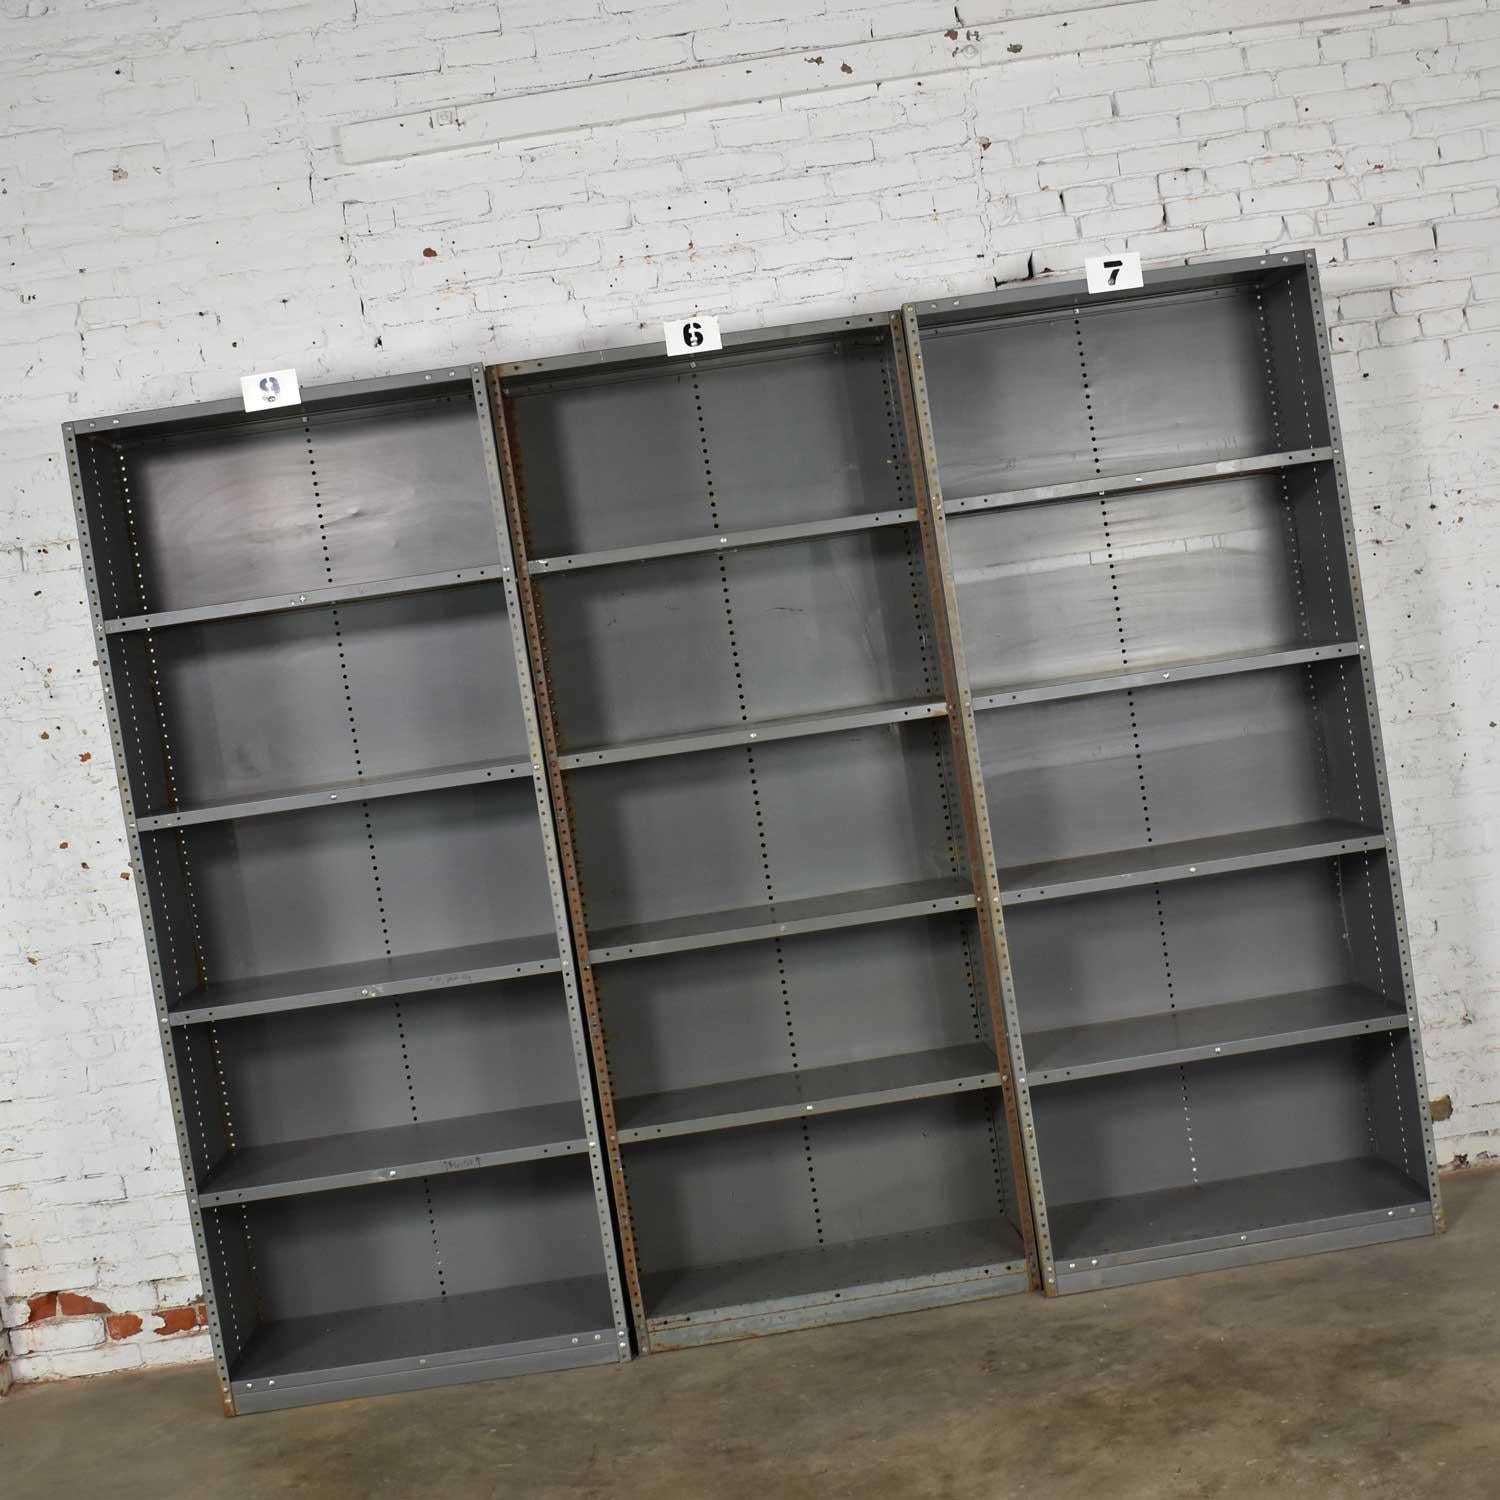 Awesome vintage industrial steel bookcase or shelving units. They are painted an industrial gray / green and have great age patina. All are in solid sturdy condition, but each have their own personality of dings, dents, rust and bare spots that